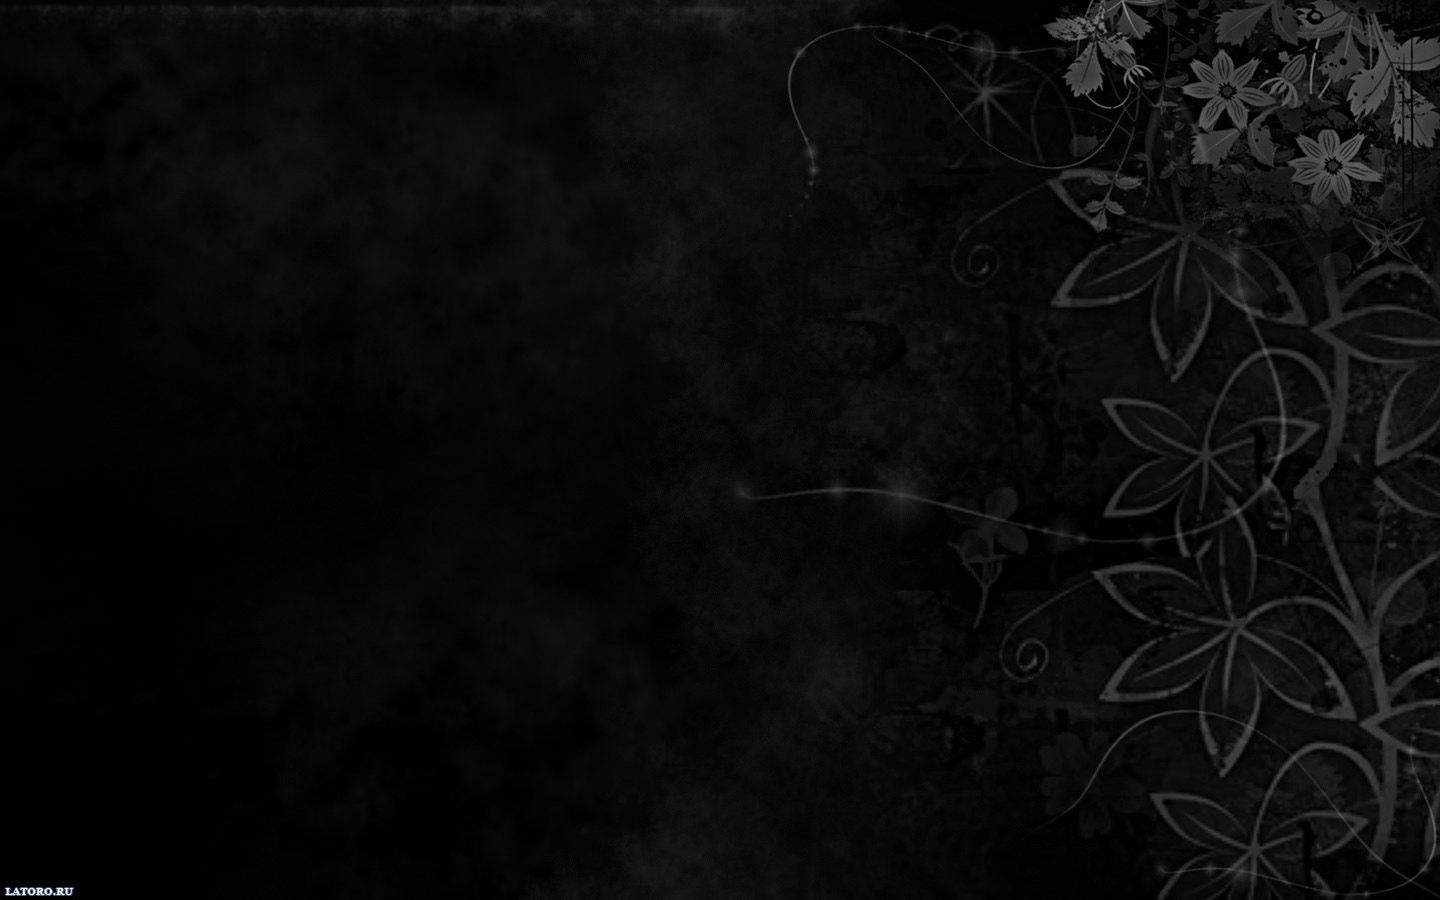 Dark Aesthetic Computer Wallpapers On Wallpaperdog Tons of awesome black aesthetic laptop wallpapers to download for free. dark aesthetic computer wallpapers on